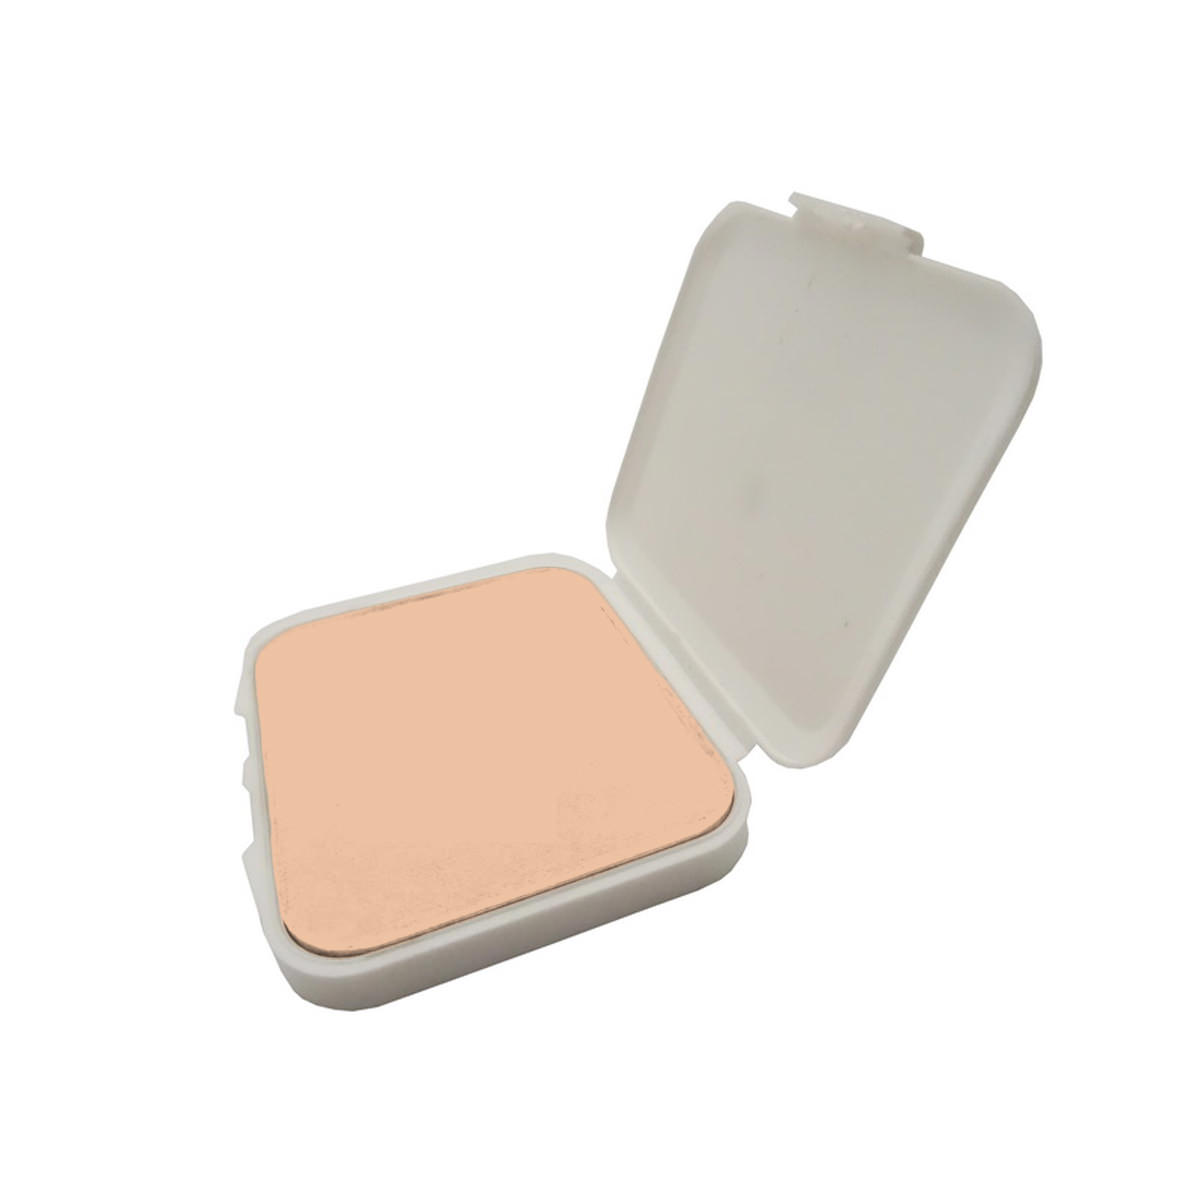 Caring-Colours-Dual-Action-Cake-Extra-Protection-SPF-15-Refill-Sea-Gold-sfw